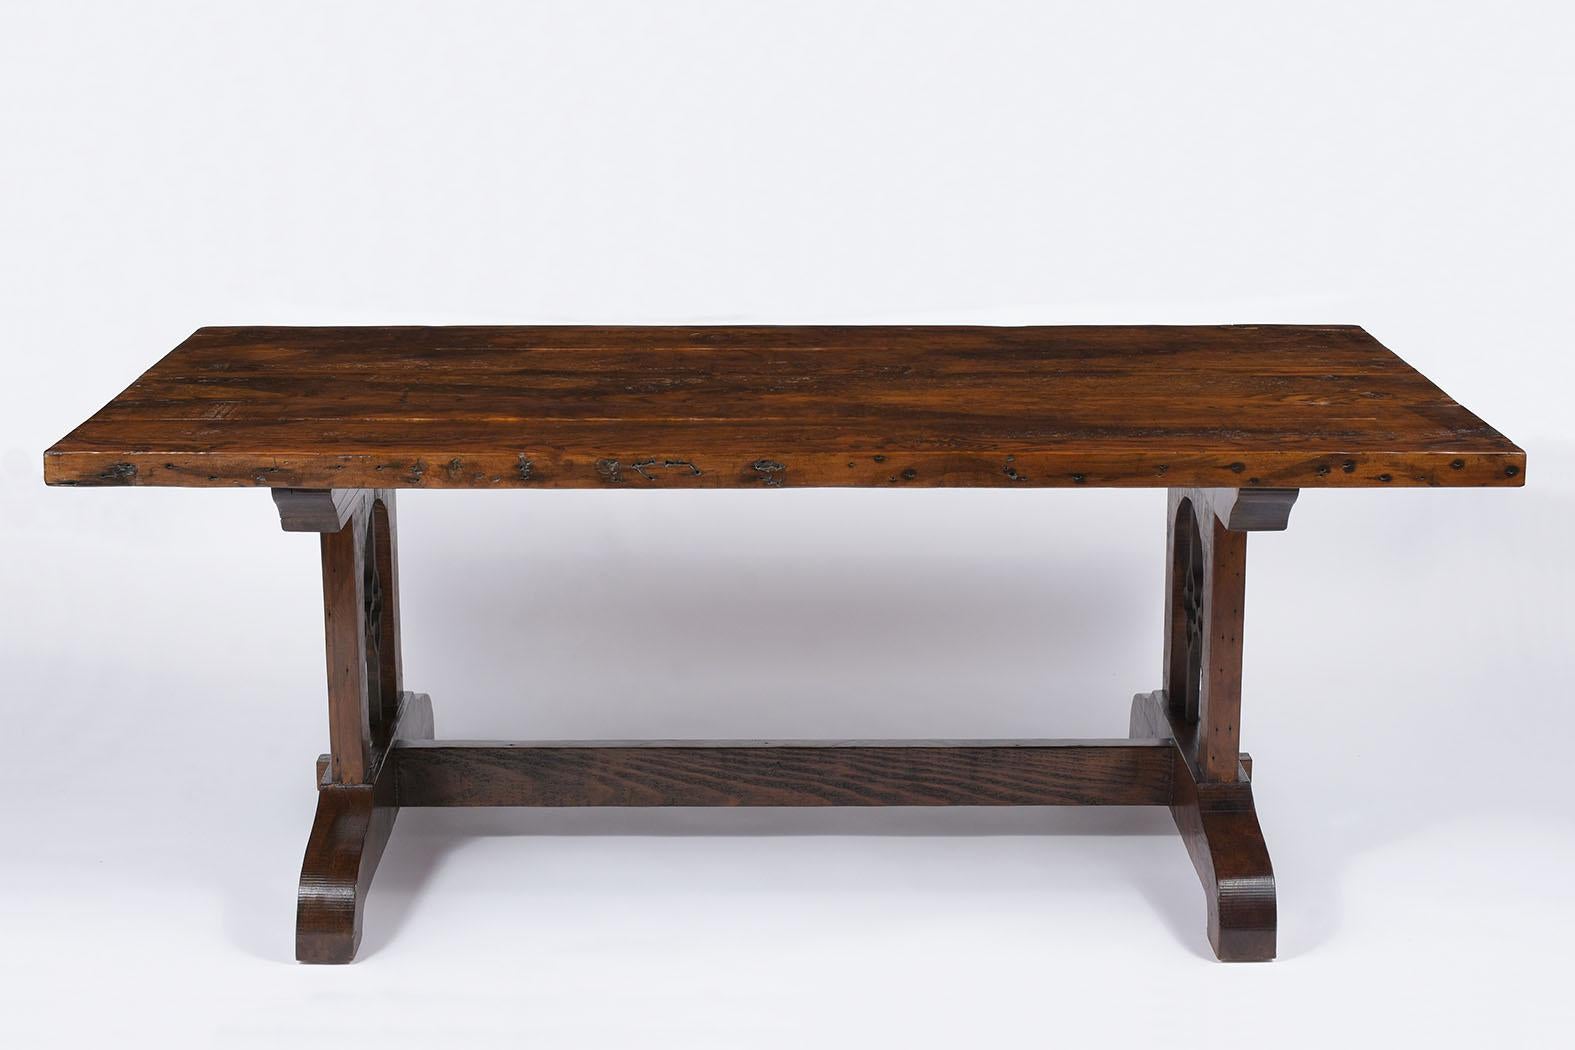 This exceptional Spanish Colonial style dining table made out of solid pine wood features a new rich walnut finish with a clear waxed varnish and polished patina finish. The table has a rectangular wooden top raised by stretched pedestal legs with